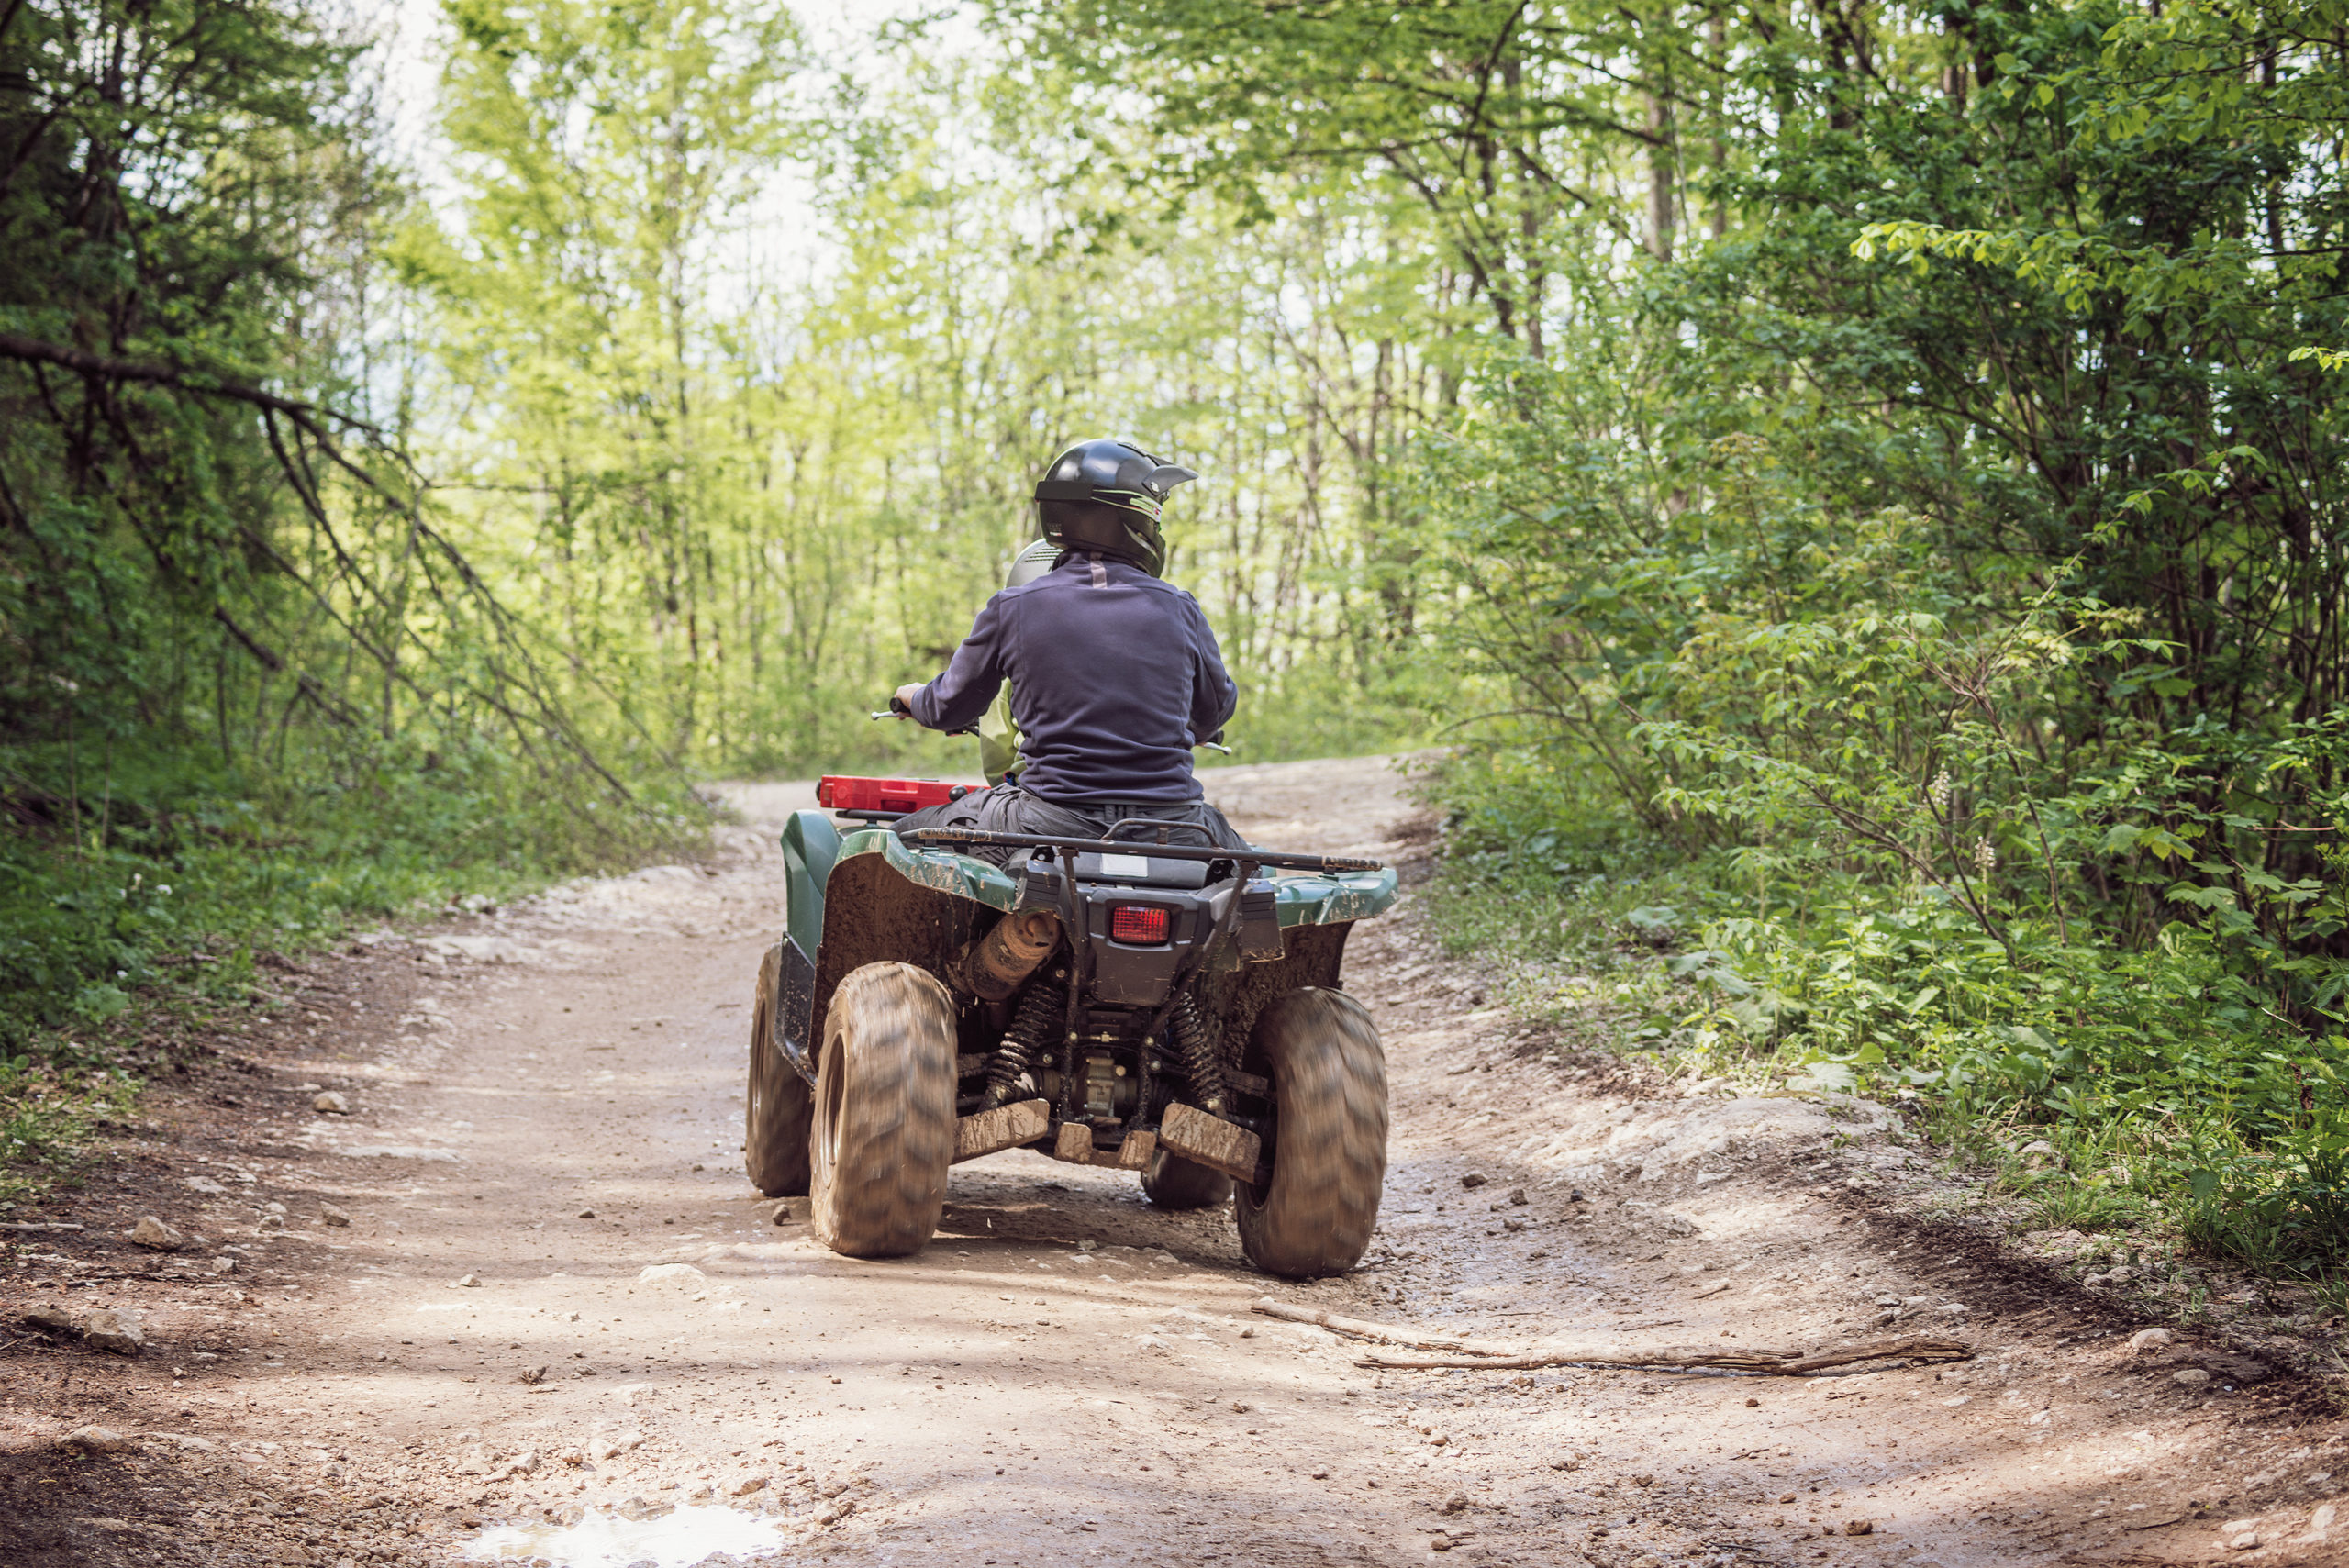 New ATV/UTV Safety Laws Now in Effect MidWest Farm Report